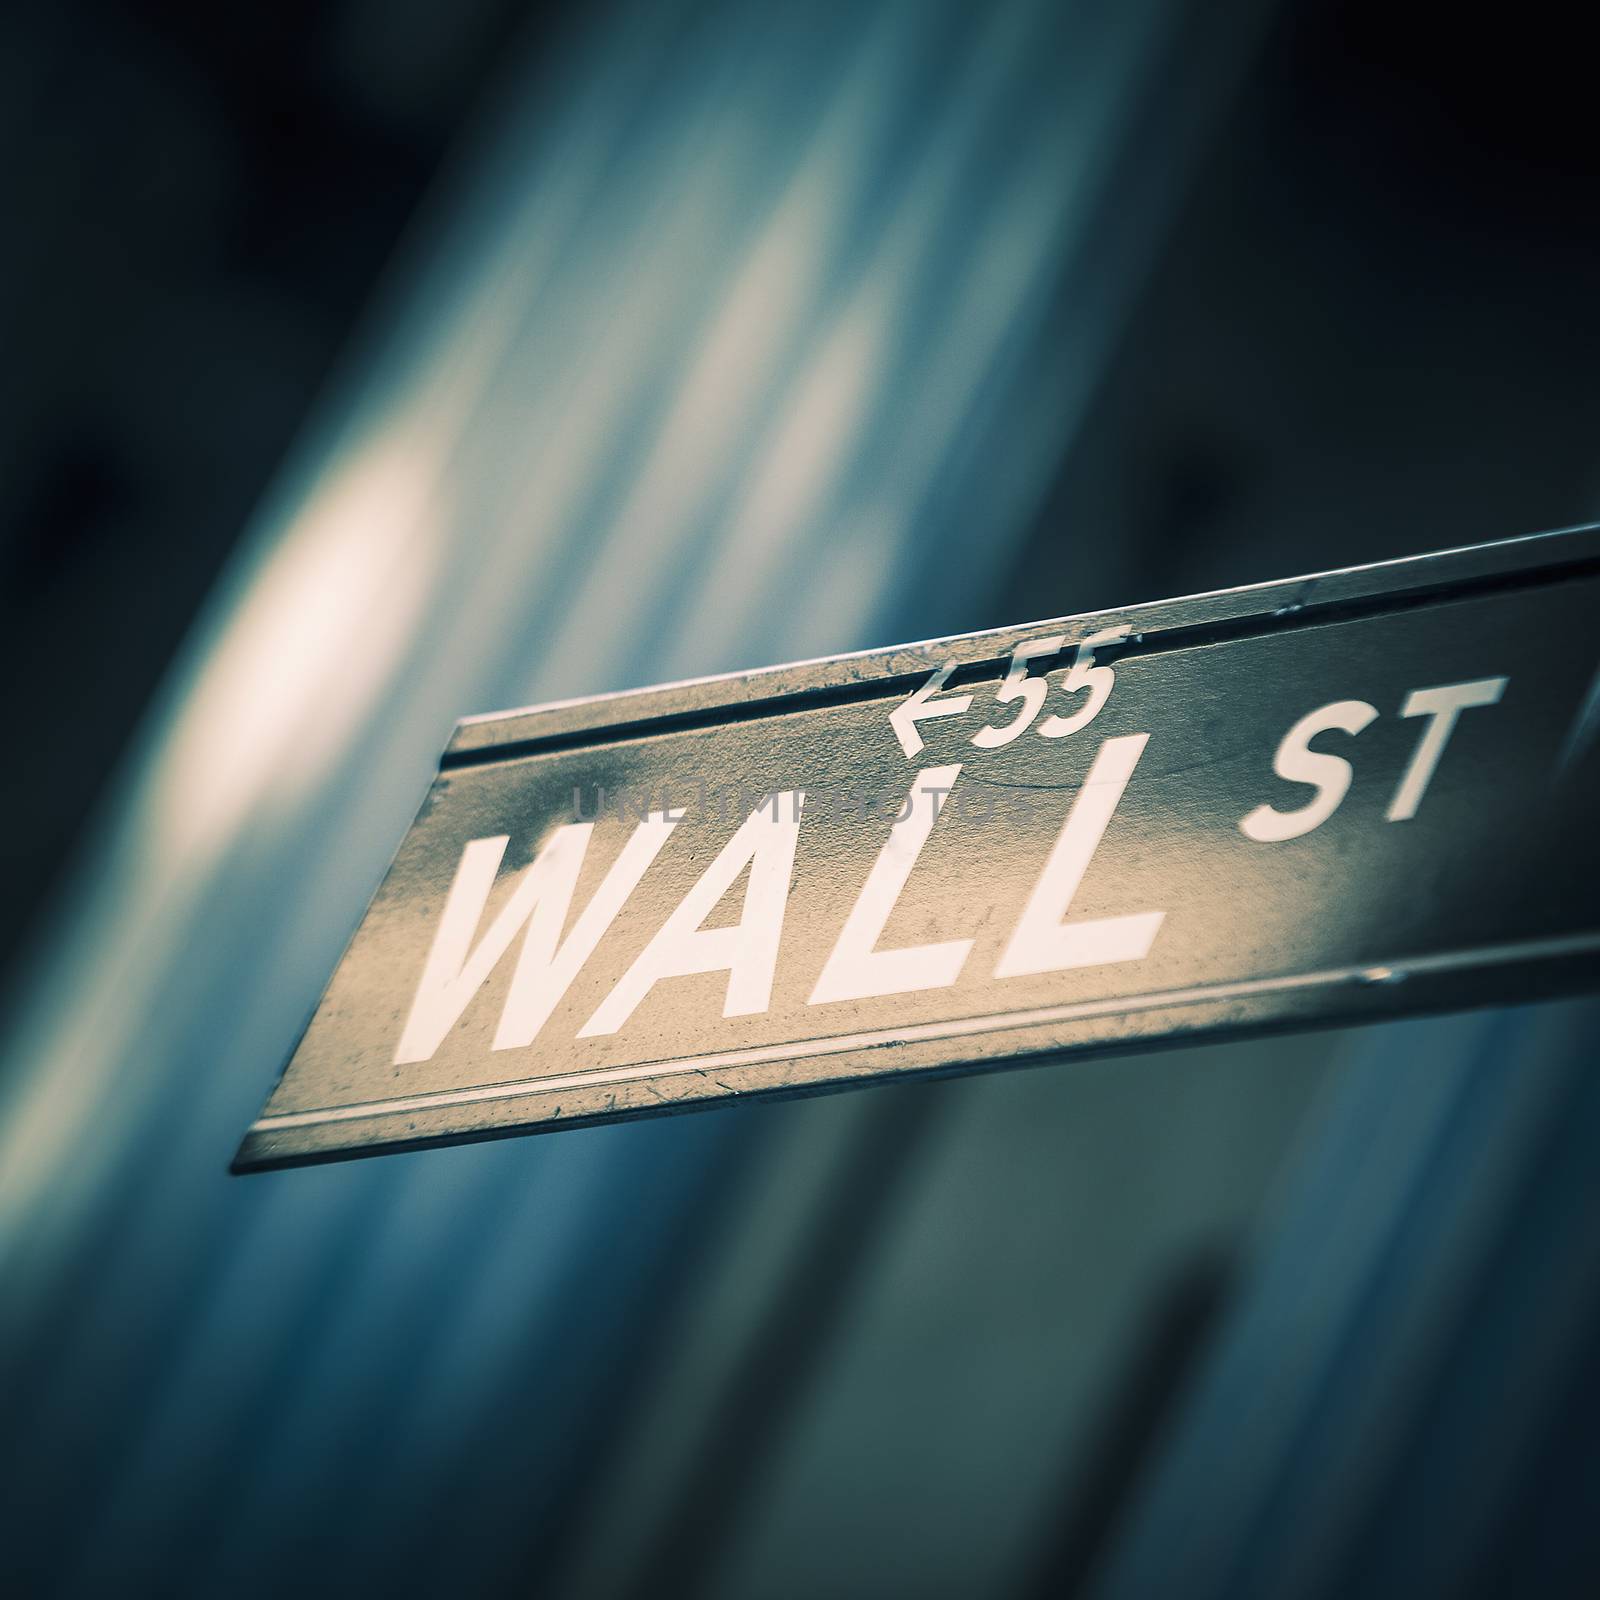 Wall street sign in New York by vwalakte